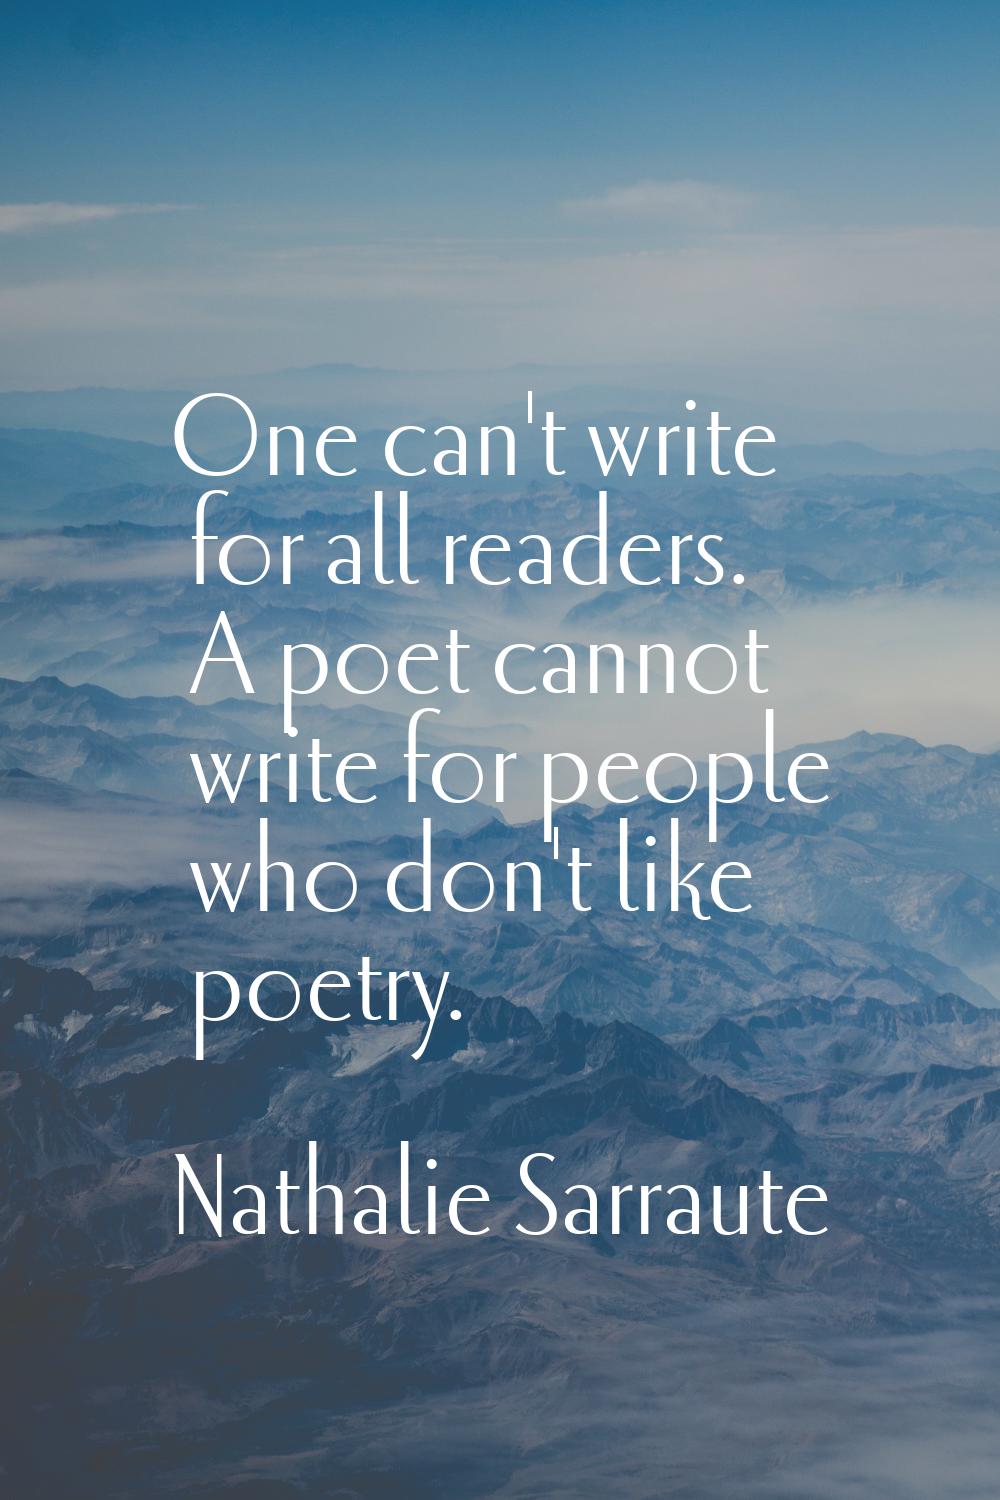 One can't write for all readers. A poet cannot write for people who don't like poetry.